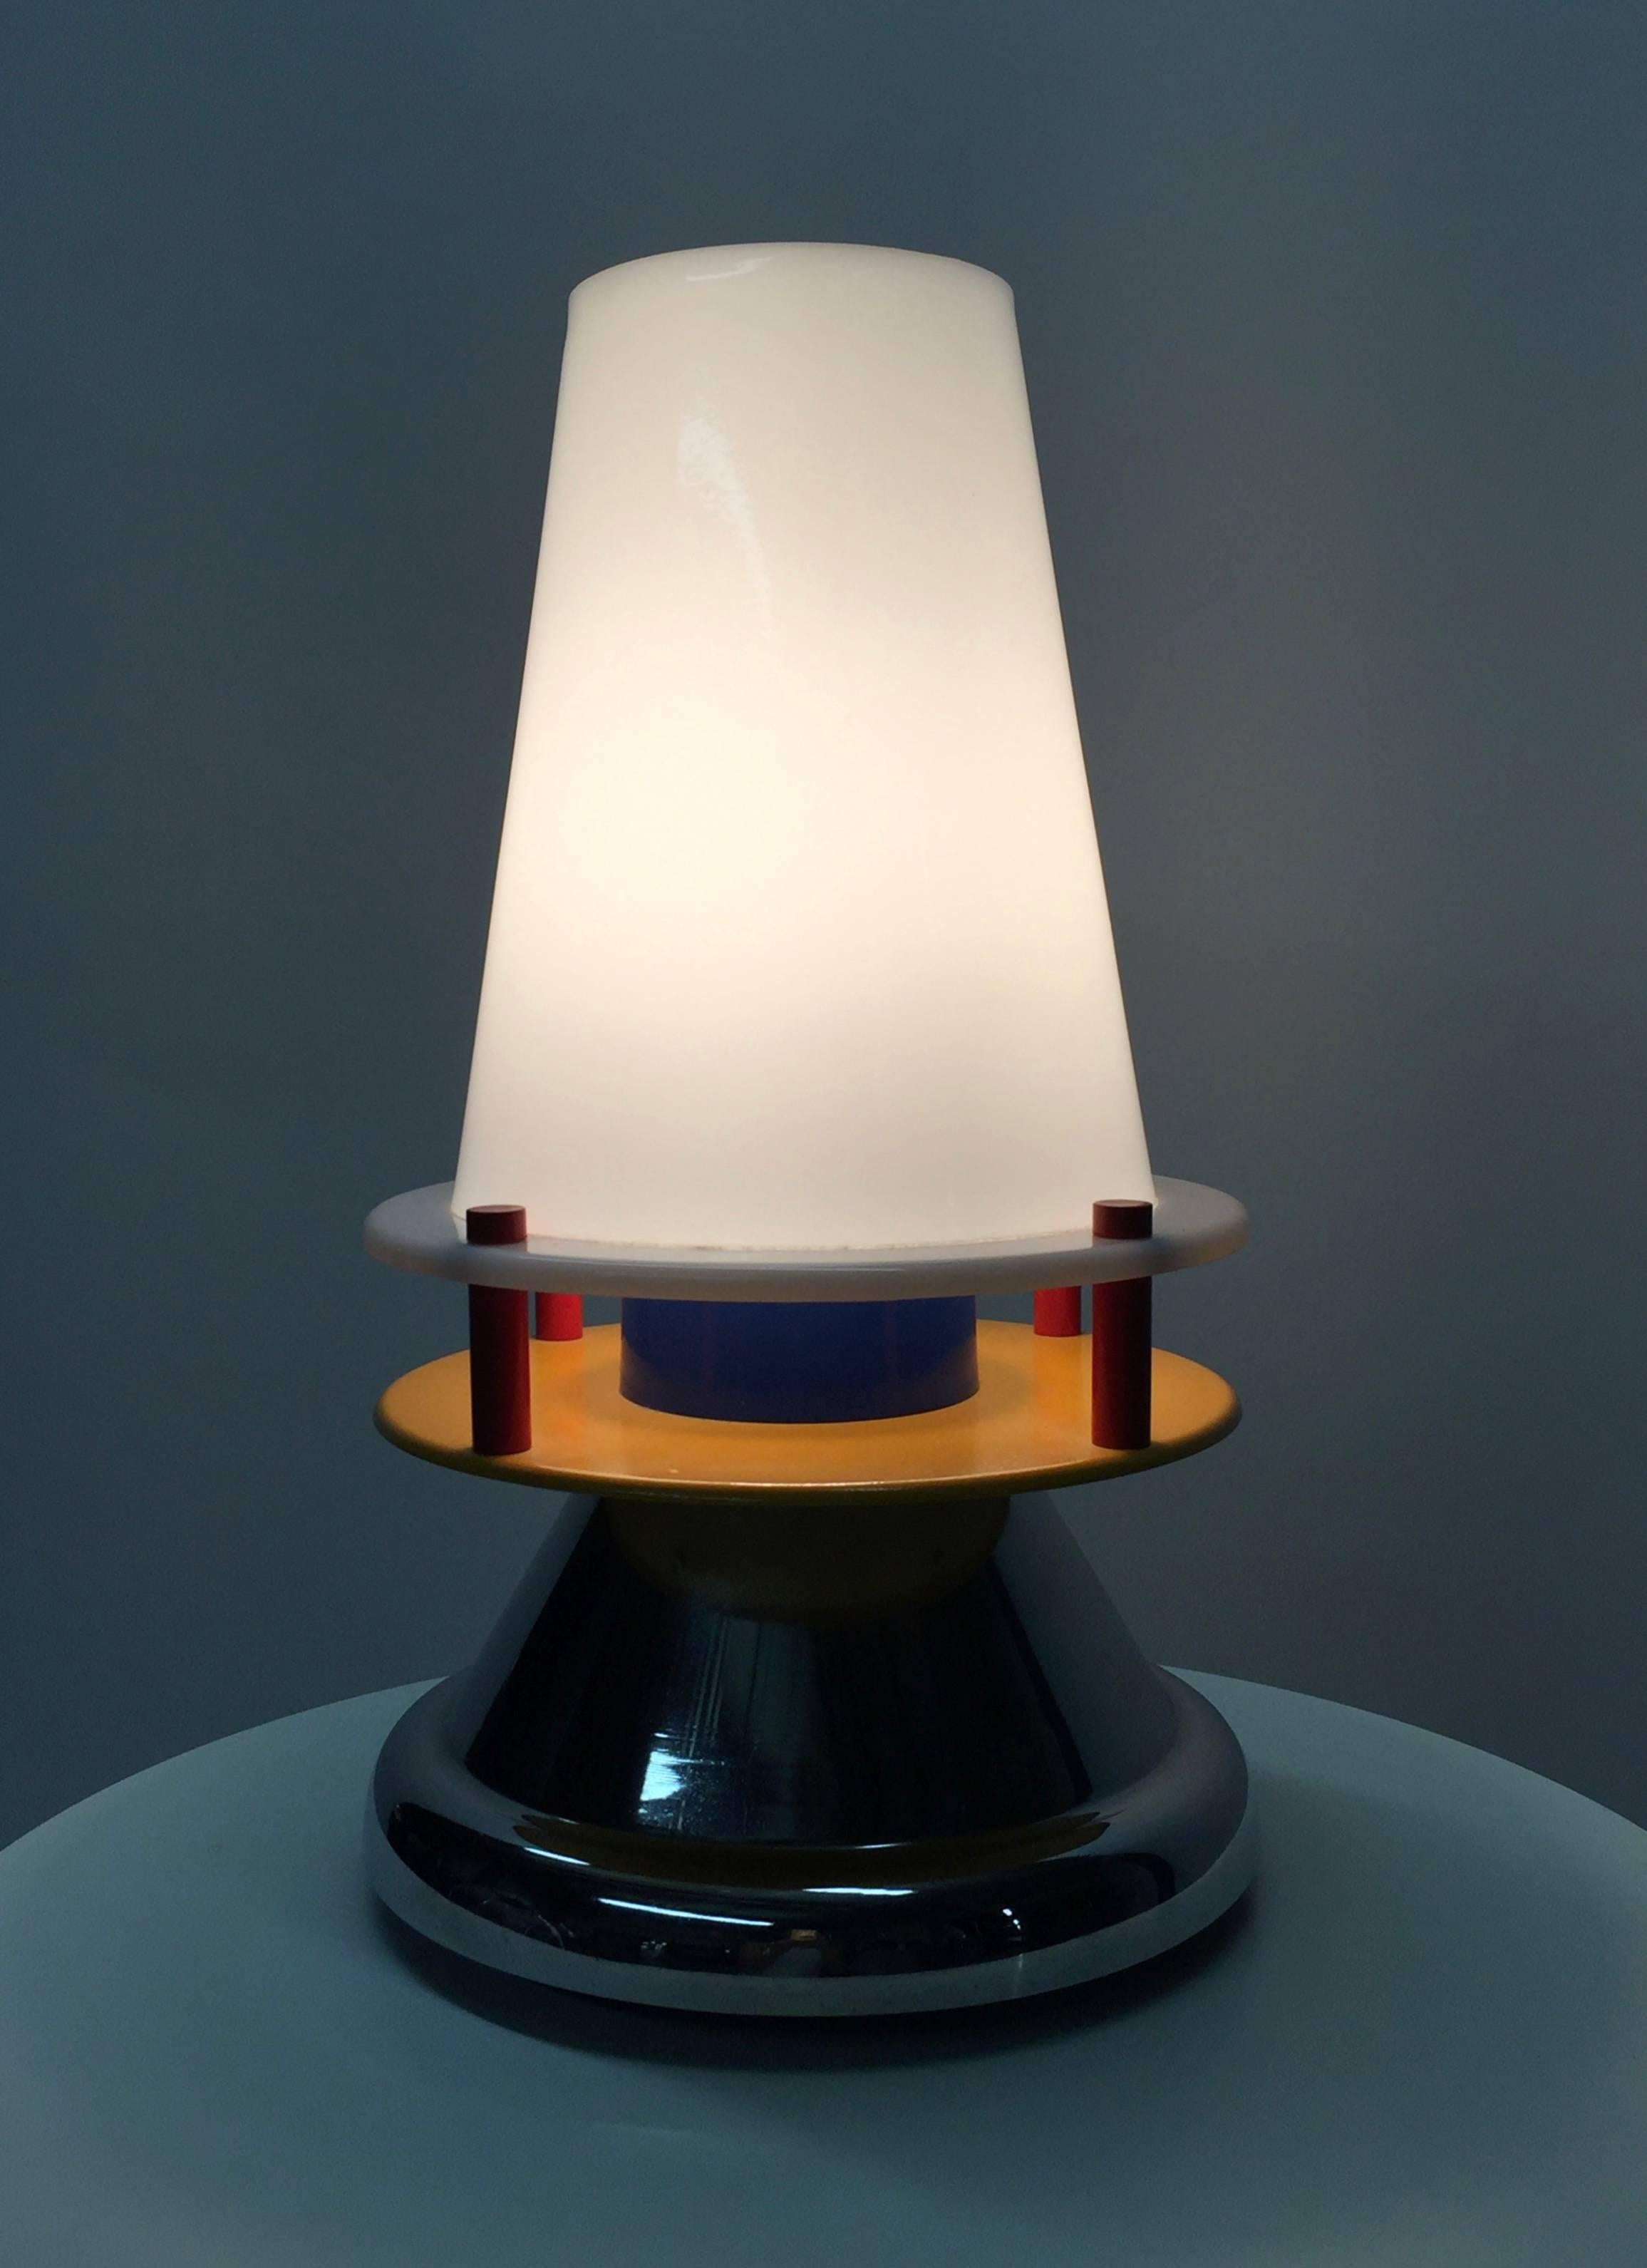 Italian Table Lamp by Nathalie du Pasquier for Memphis 1986 Made in Italy